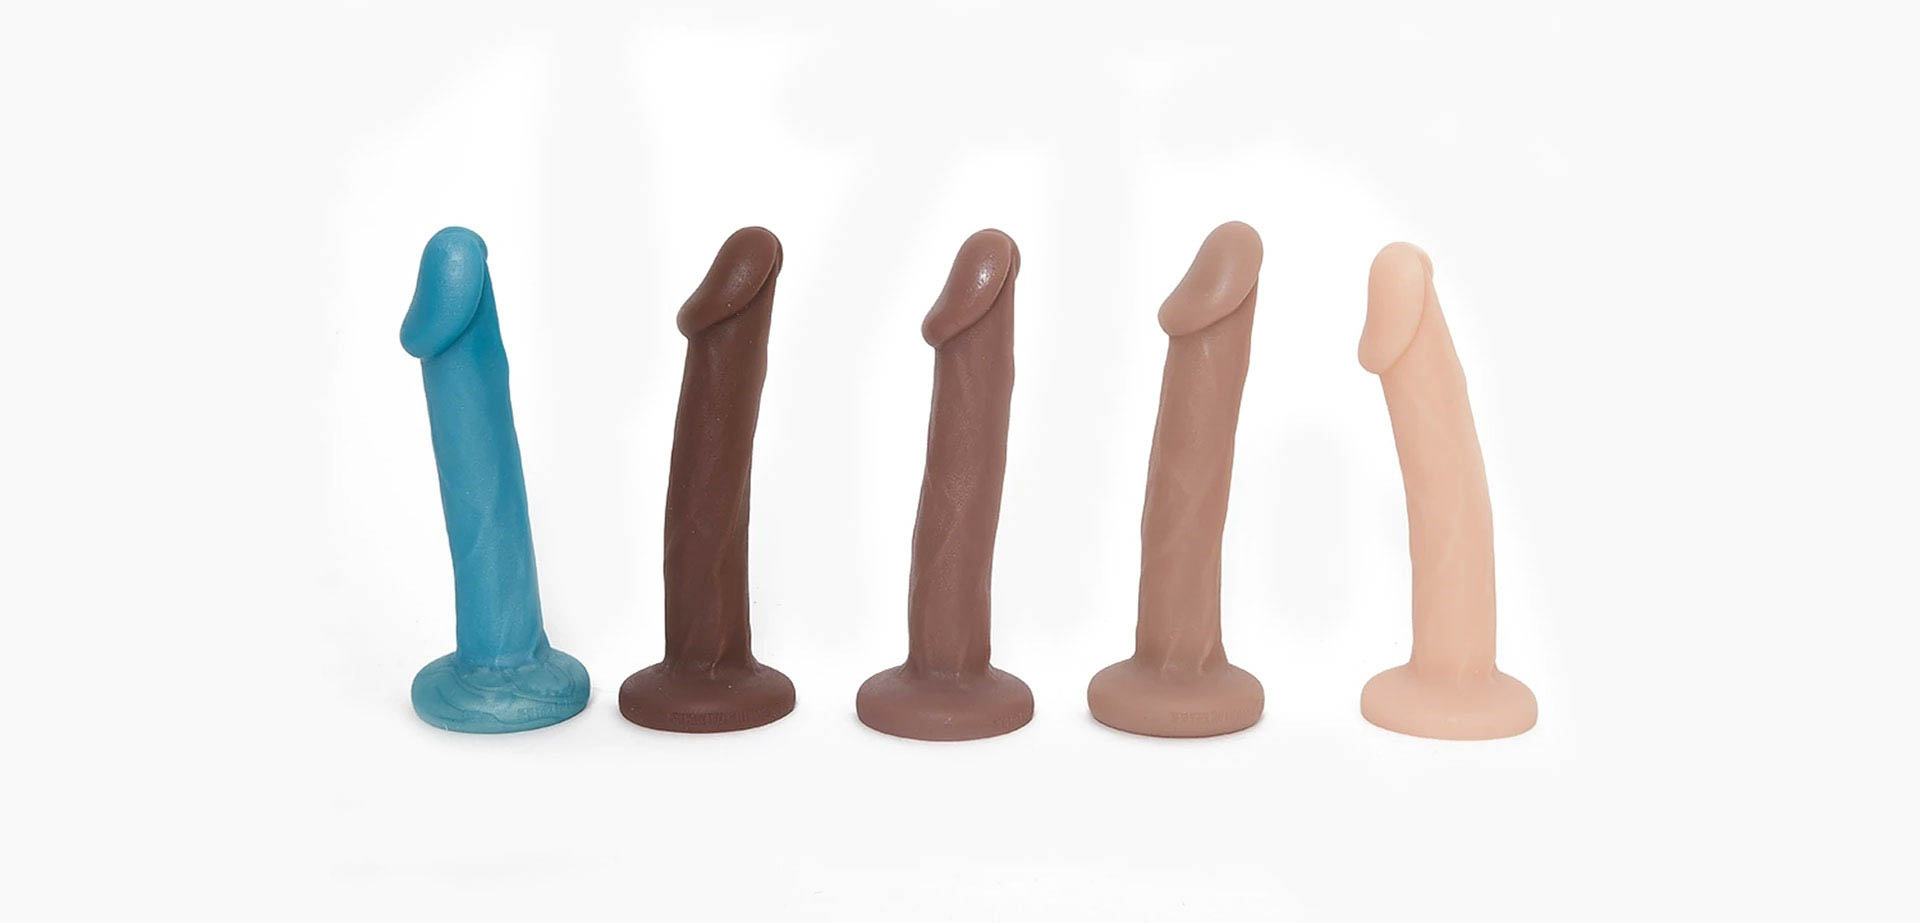 Soft silicone Suction Cup Small Dildos.